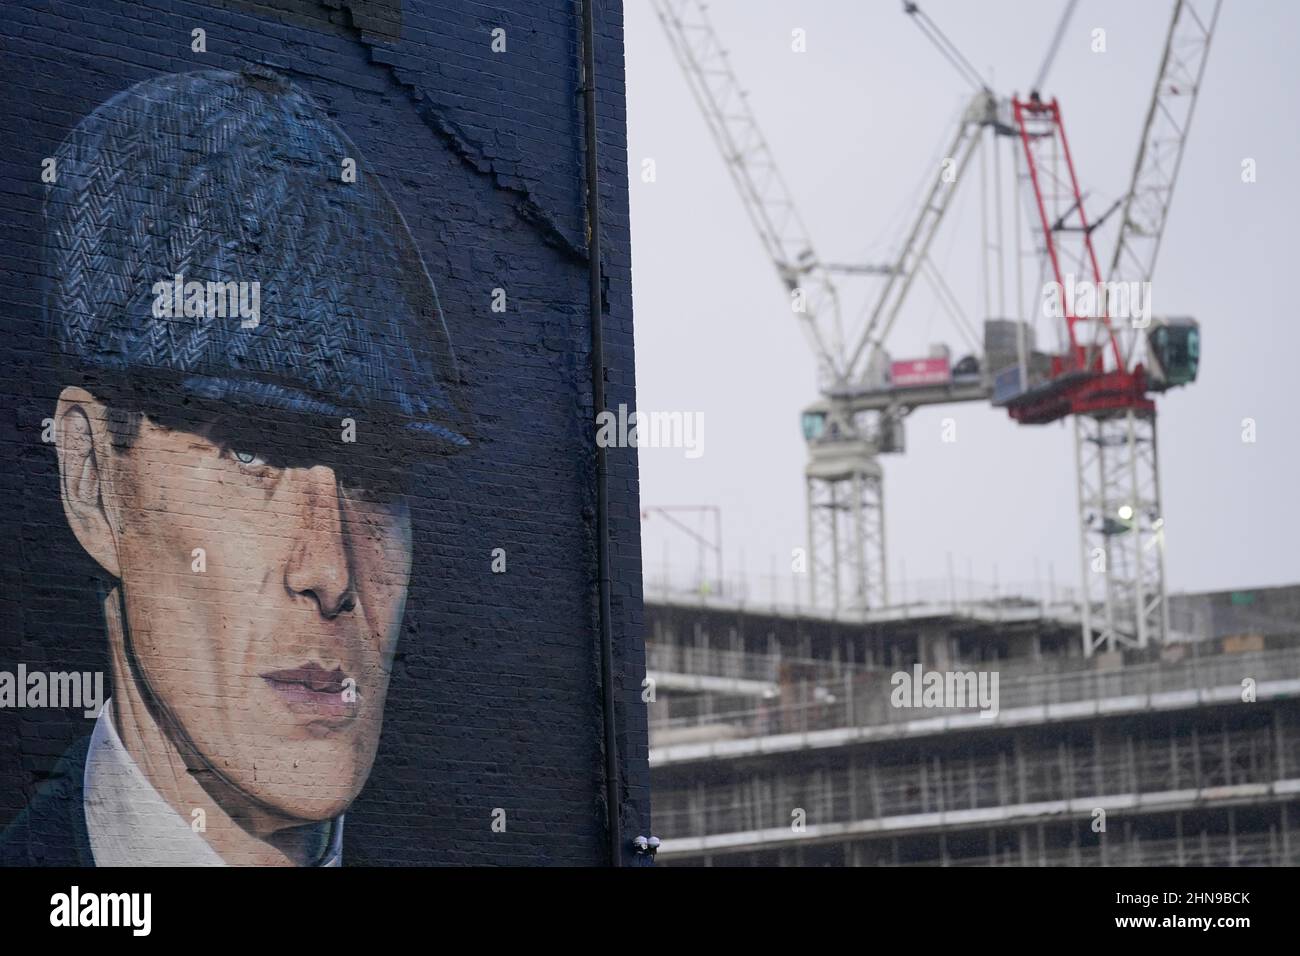 A mural by artist Akse P19, of actor Cillian Murphy, as Peaky Blinders crime boss Tommy Shelby, in the historic Deritend area of Birmingham, ahead of the sixth and final series of the hit BBC One crime series. Picture date: Tuesday February 15, 2022. Stock Photo